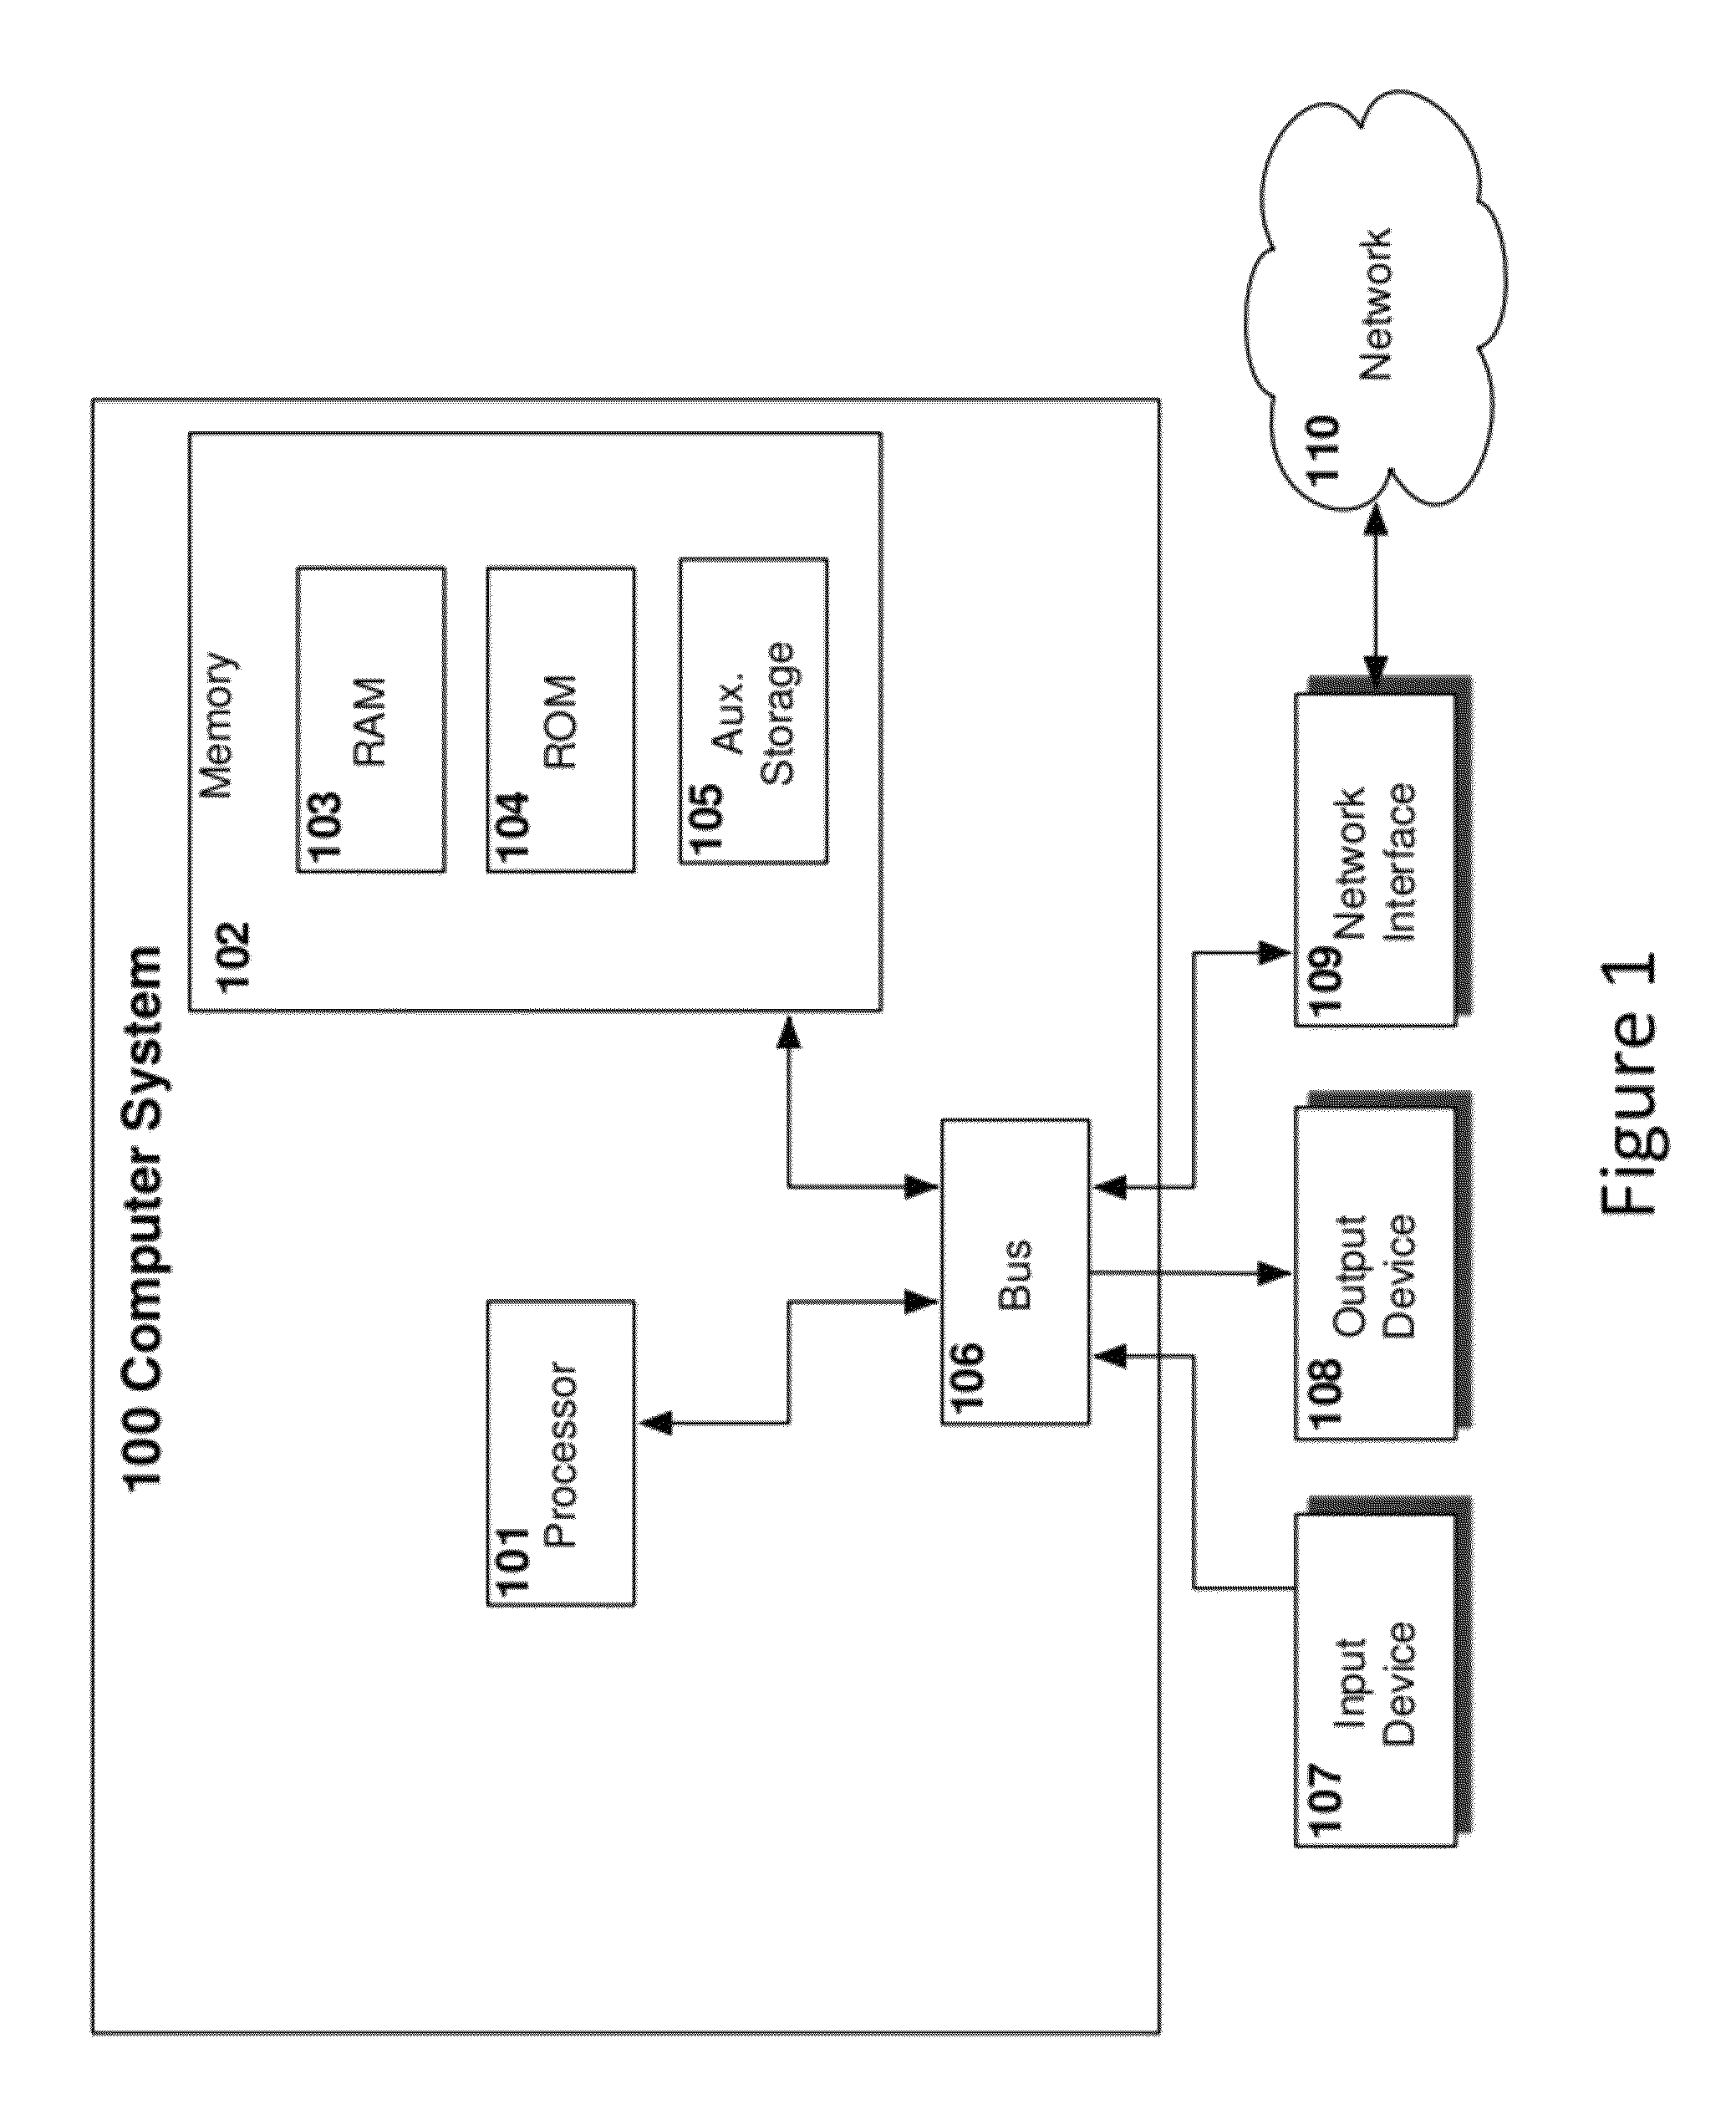 Computer based system and method for medical symptoms analysis, visualization and social network